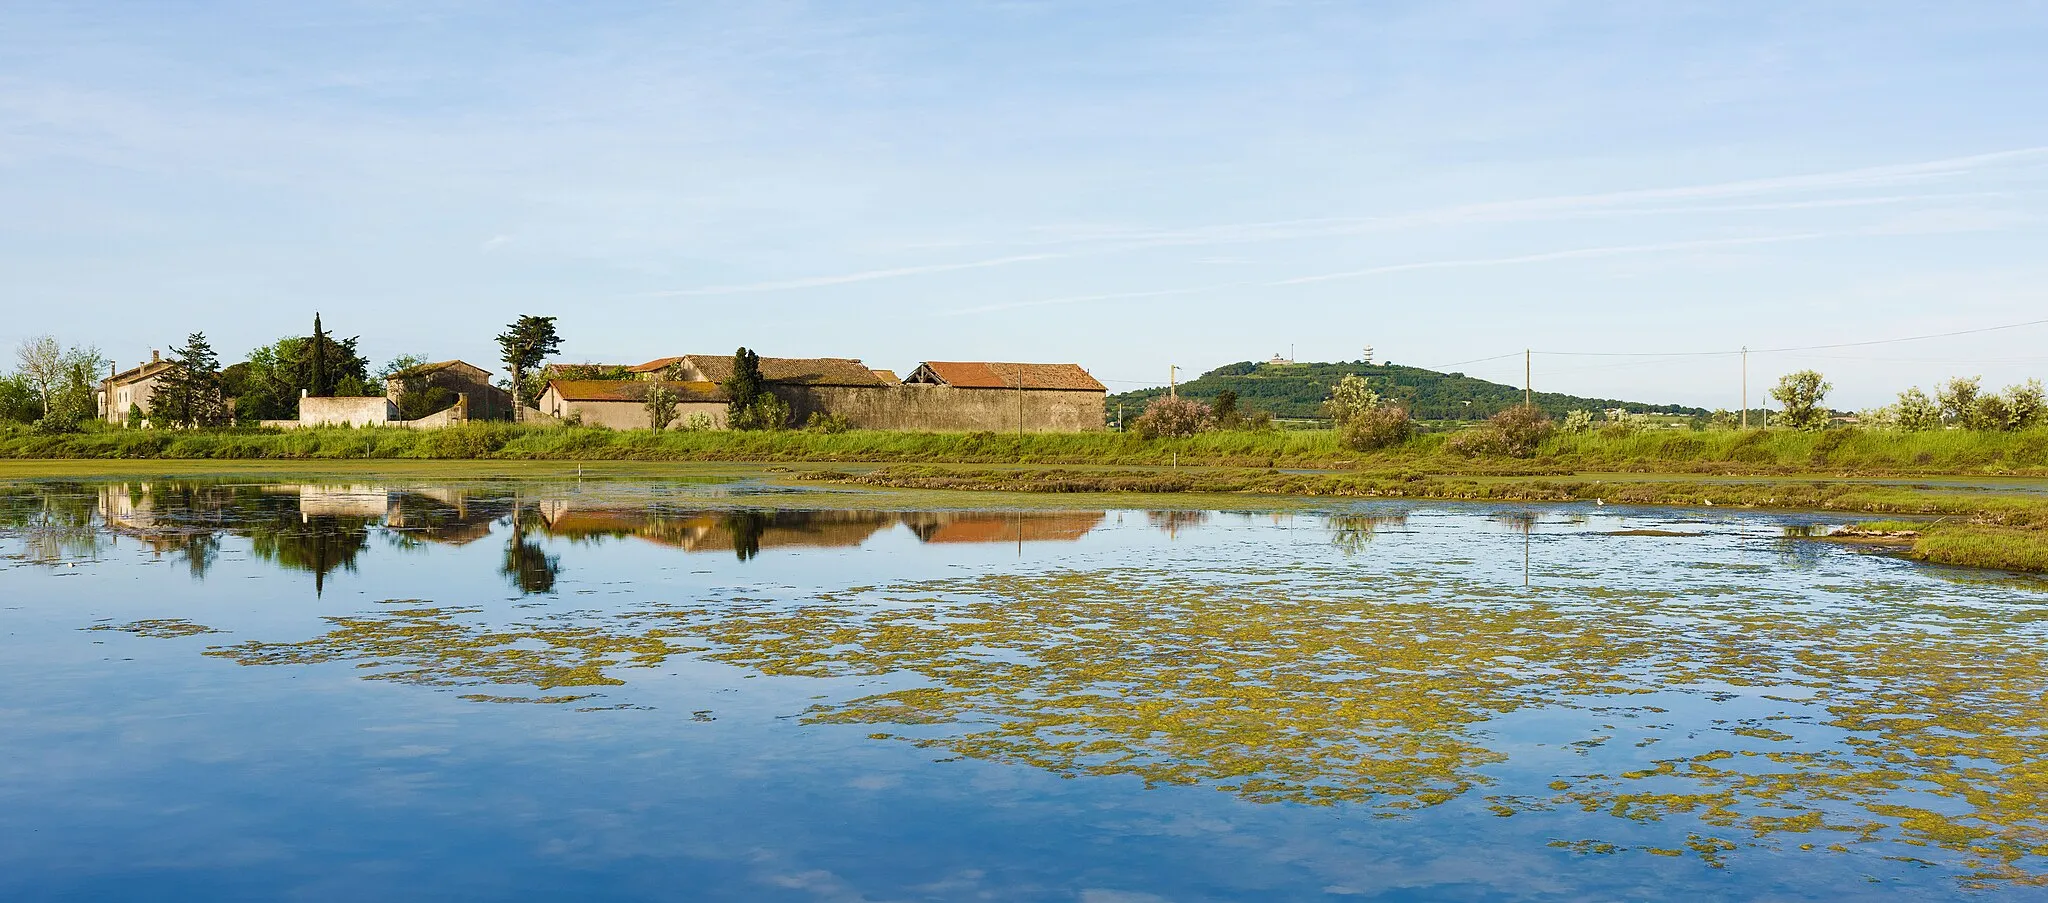 Photo showing: The house of the "Réserve naturelle nationale du Bagnas" (Bagnas National Nature Reserve), house situated in the commune of Agde, is reflected in the Rieu inlet. On the surface of the water there is seen green algae of the family Characeae (Charophyceae). Photo taken from the Northeast in the commune of Marseillan. Hérault, France.